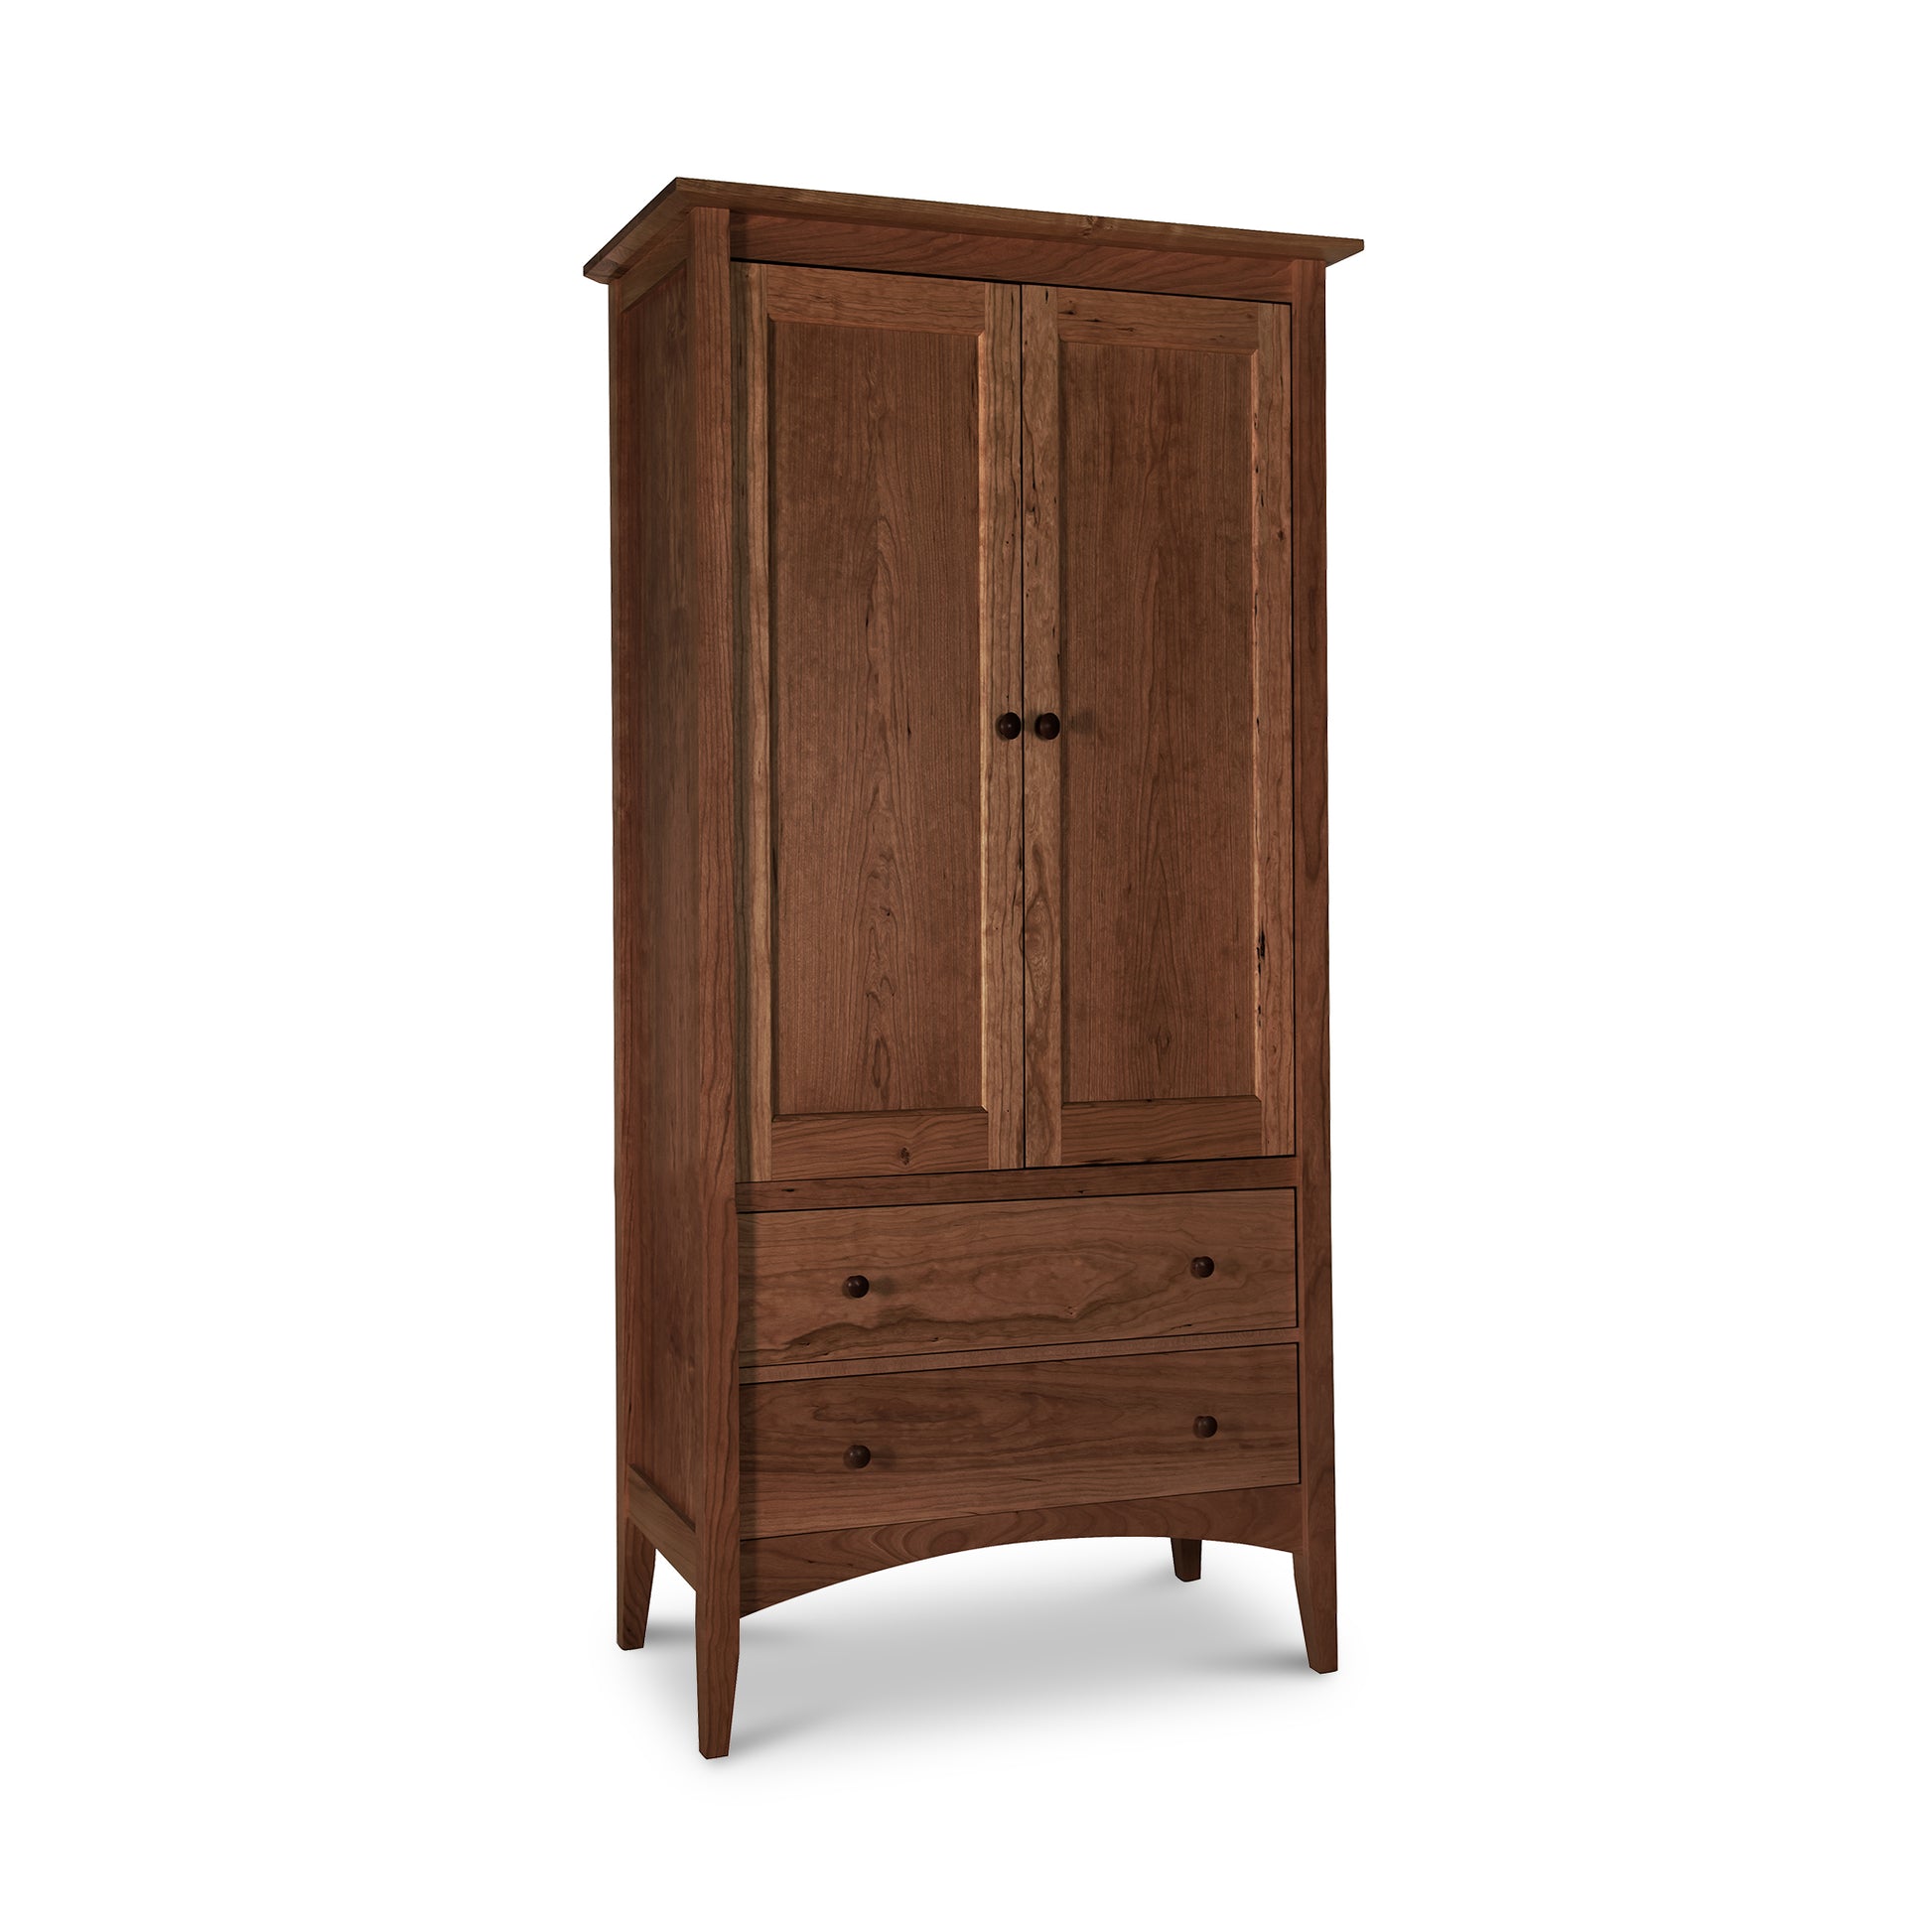 A Maple Corner Woodworks American Shaker Armoire with two doors above and two drawers below, set against a plain white background. The wood is a deep brown with a visible grain texture.